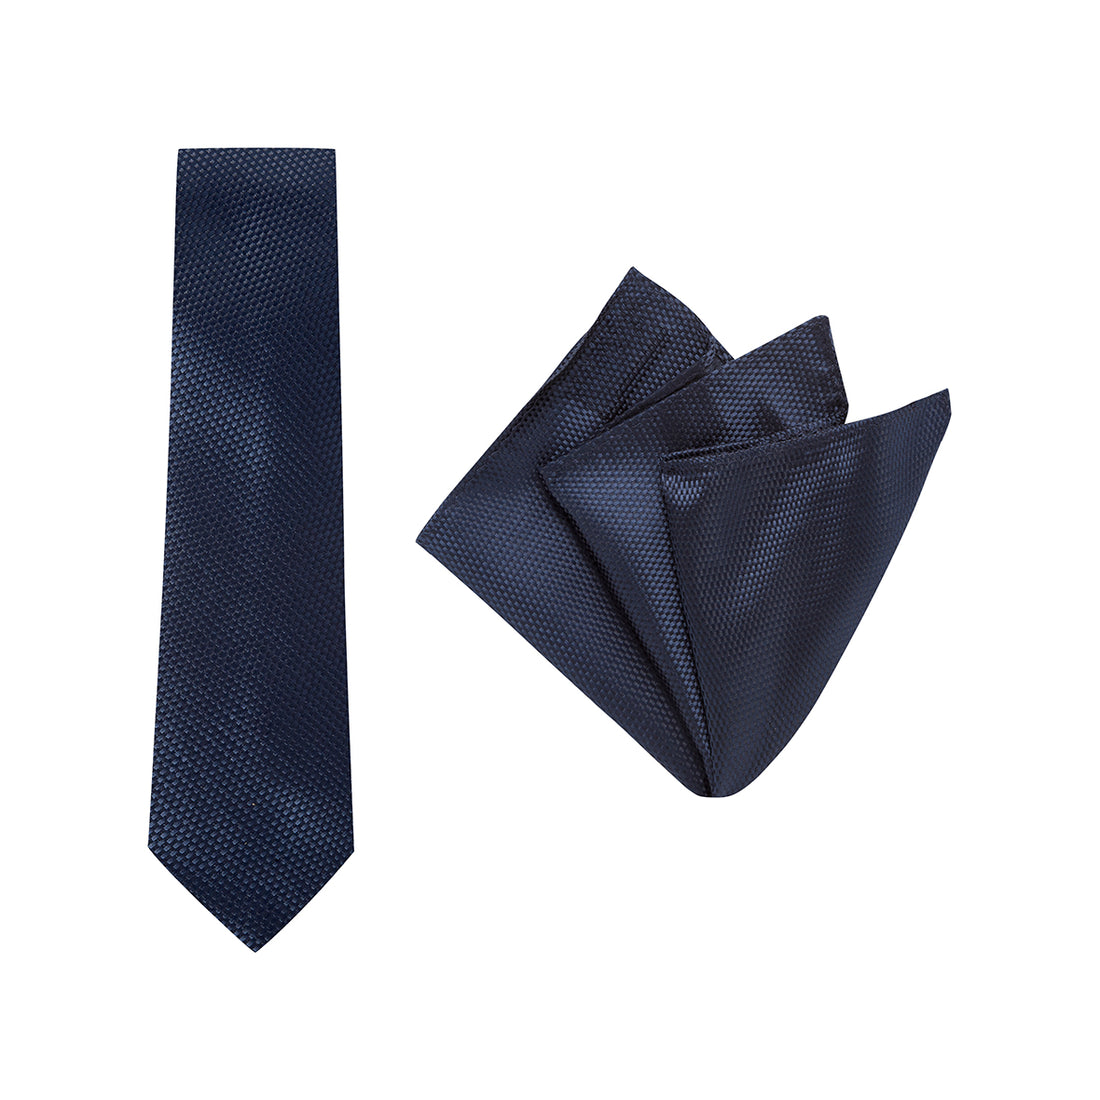 TIE + POCKET SQUARE SET. Carbon. Navy. Supplied with matching pocket square.-Ties-PEROZ Accessories